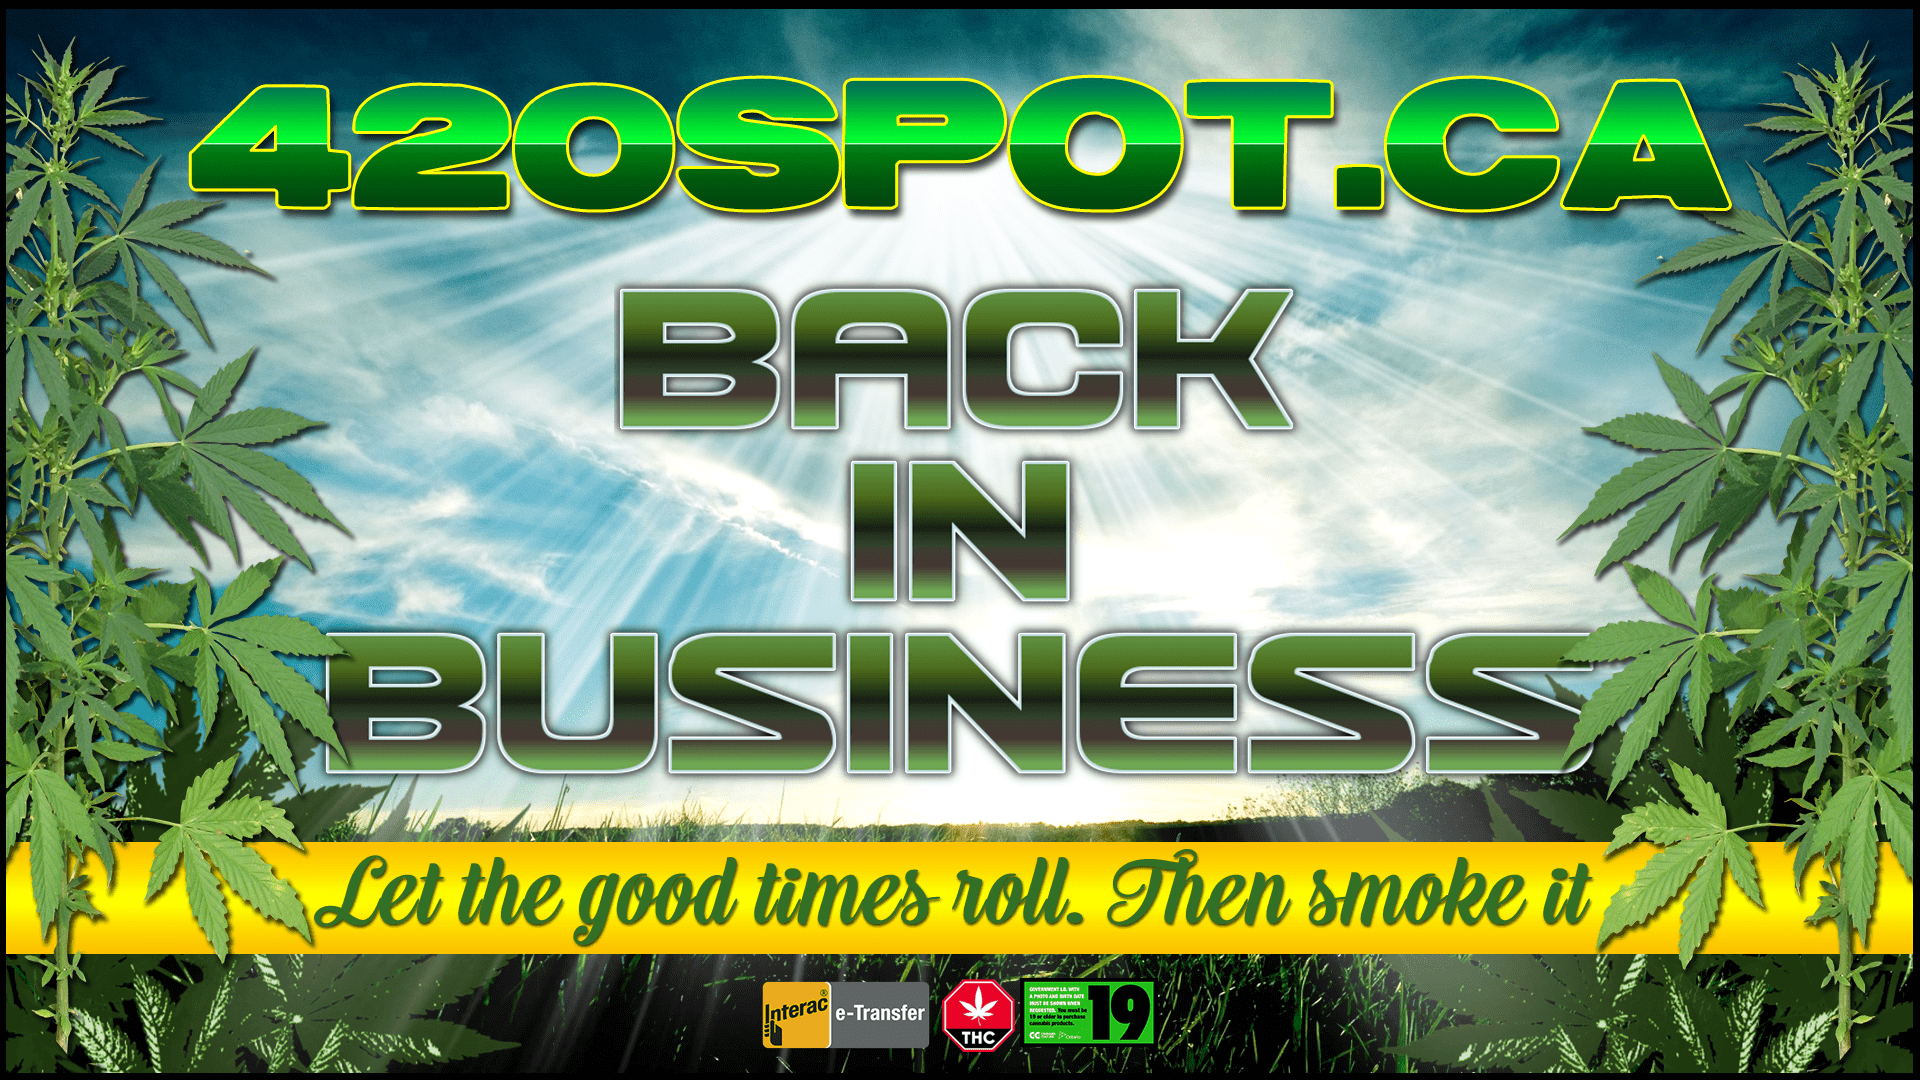 420 SPOT - BACK IN BUSINESS Cannabis